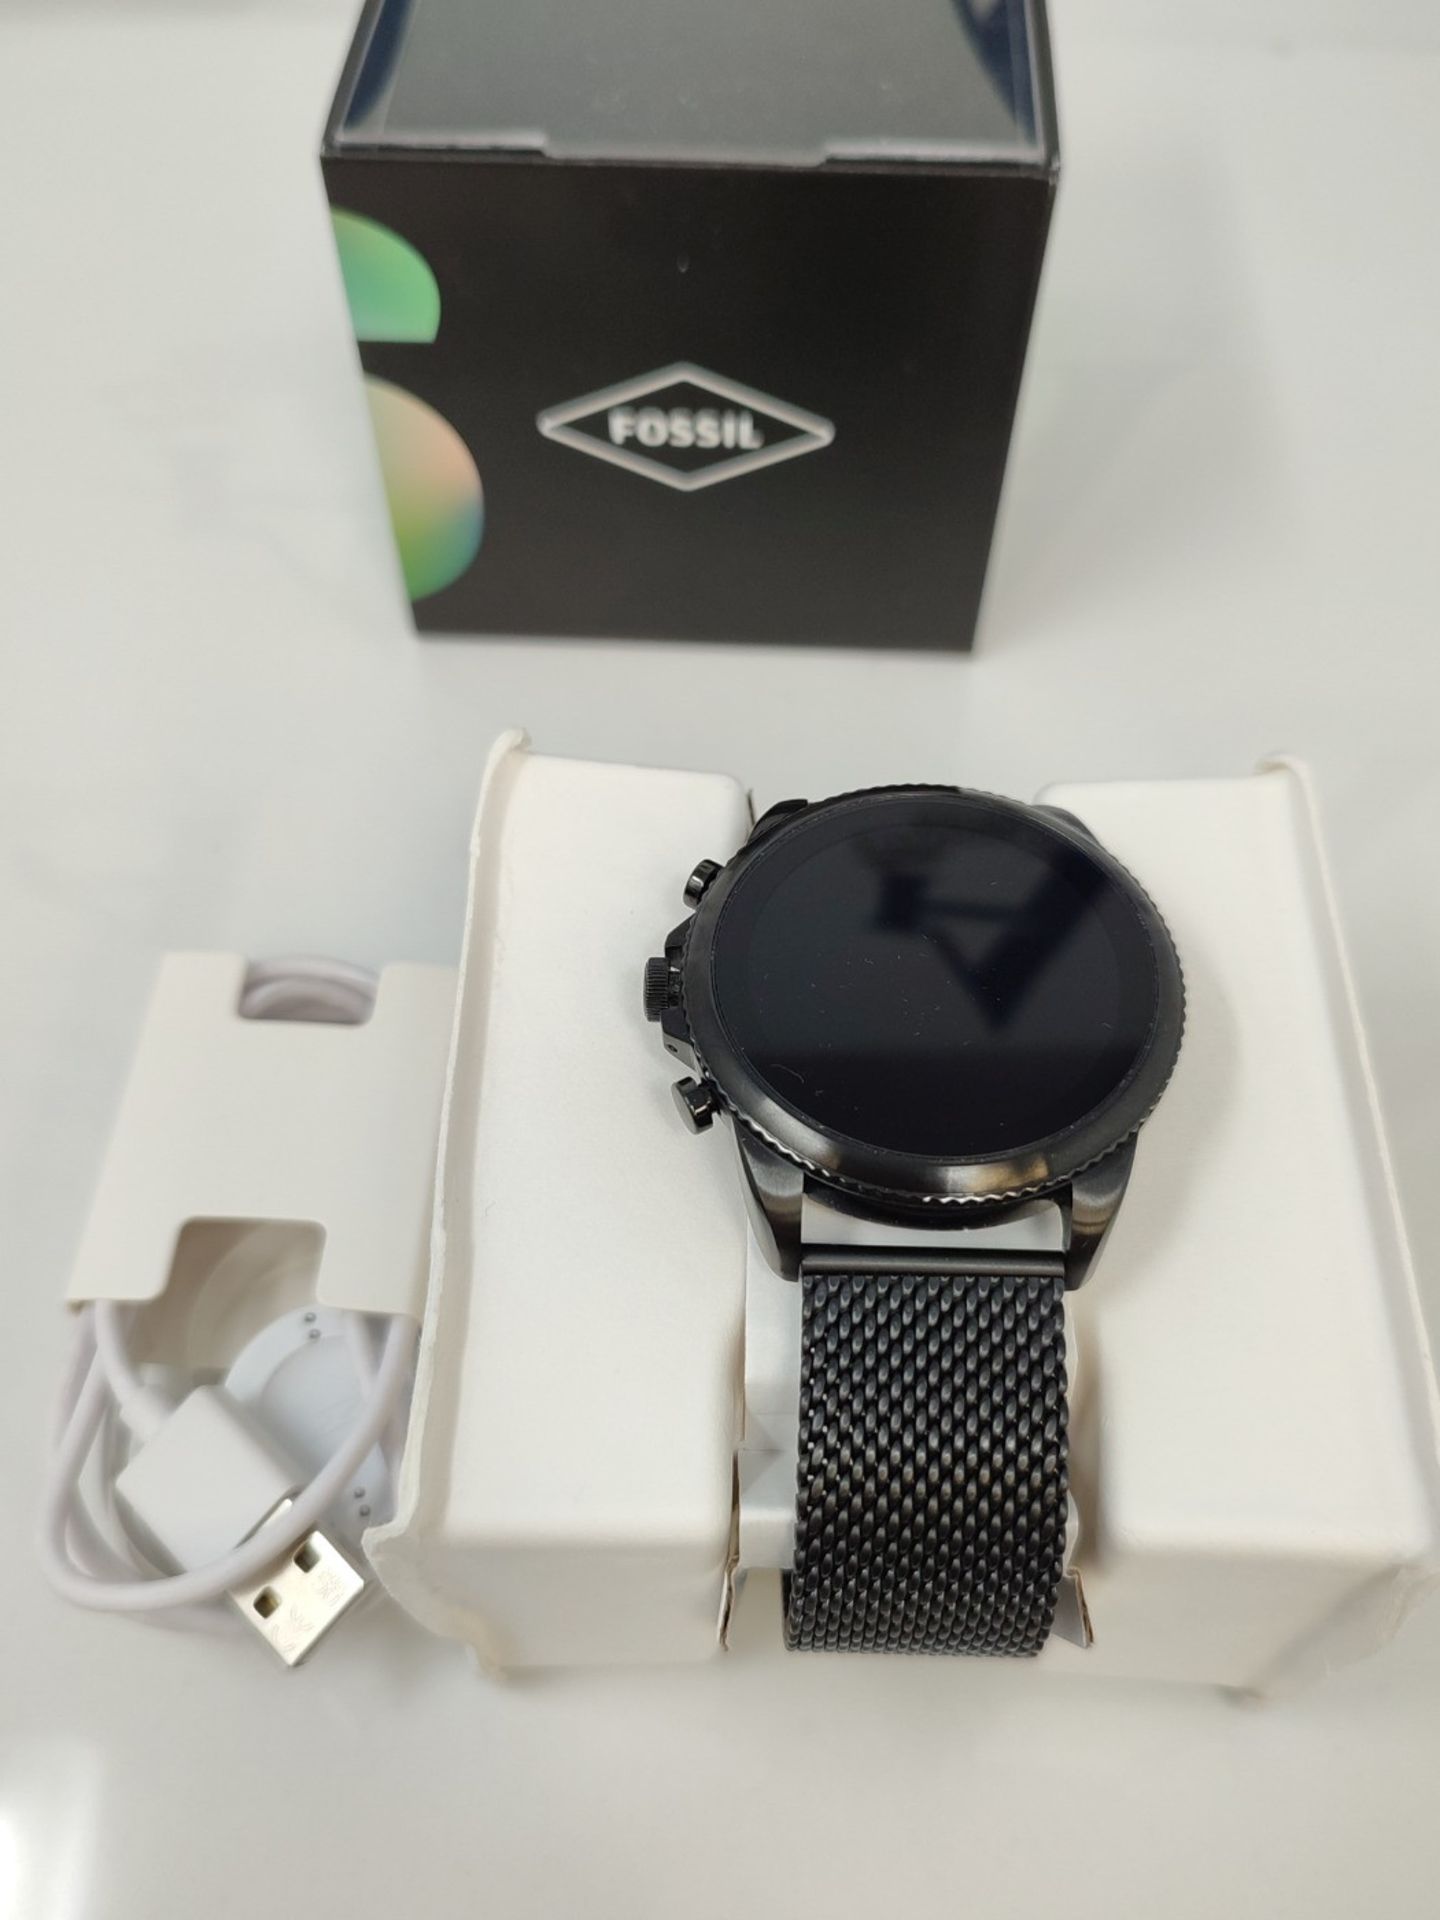 RRP £230.00 Fossil Men's Gen 6 smartwatch with speaker, heart rate, NFC, and smartphone alerts $FT - Image 2 of 6